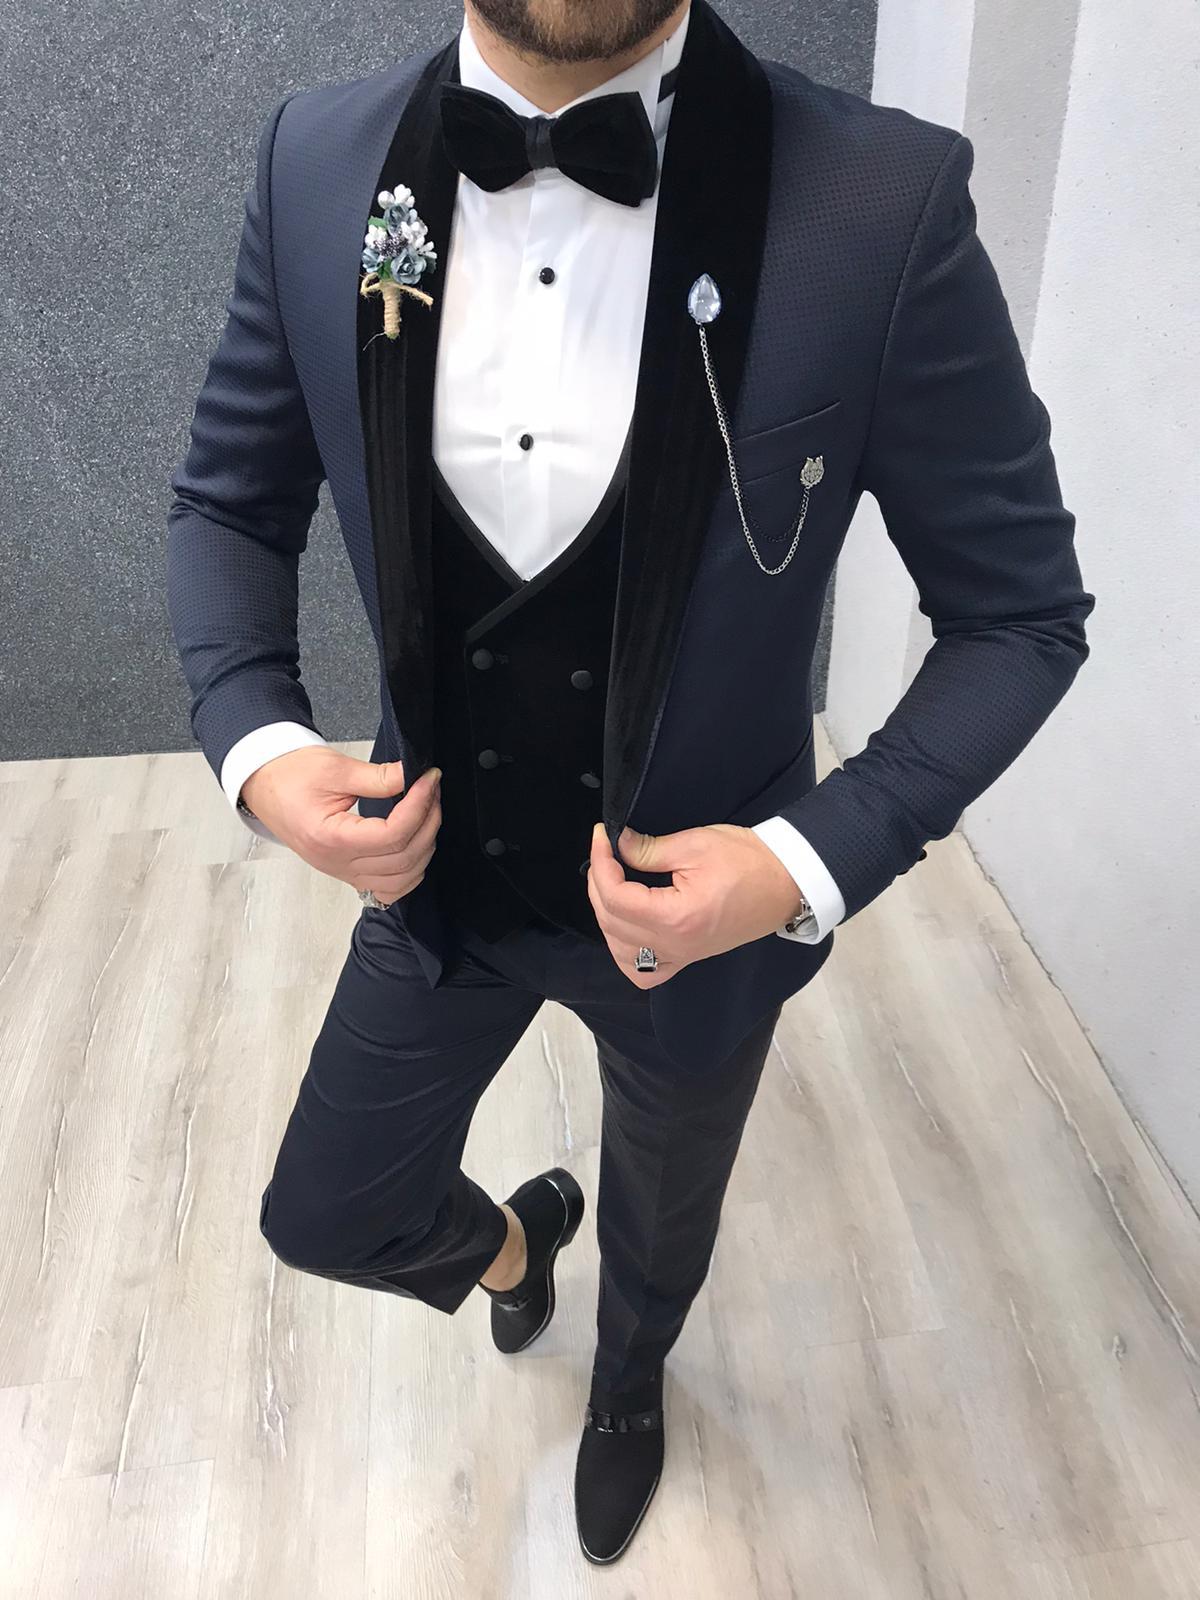 How to Wear a Blue Tuxedo – 5 Simple Rules by BespokeDailyShop Blog